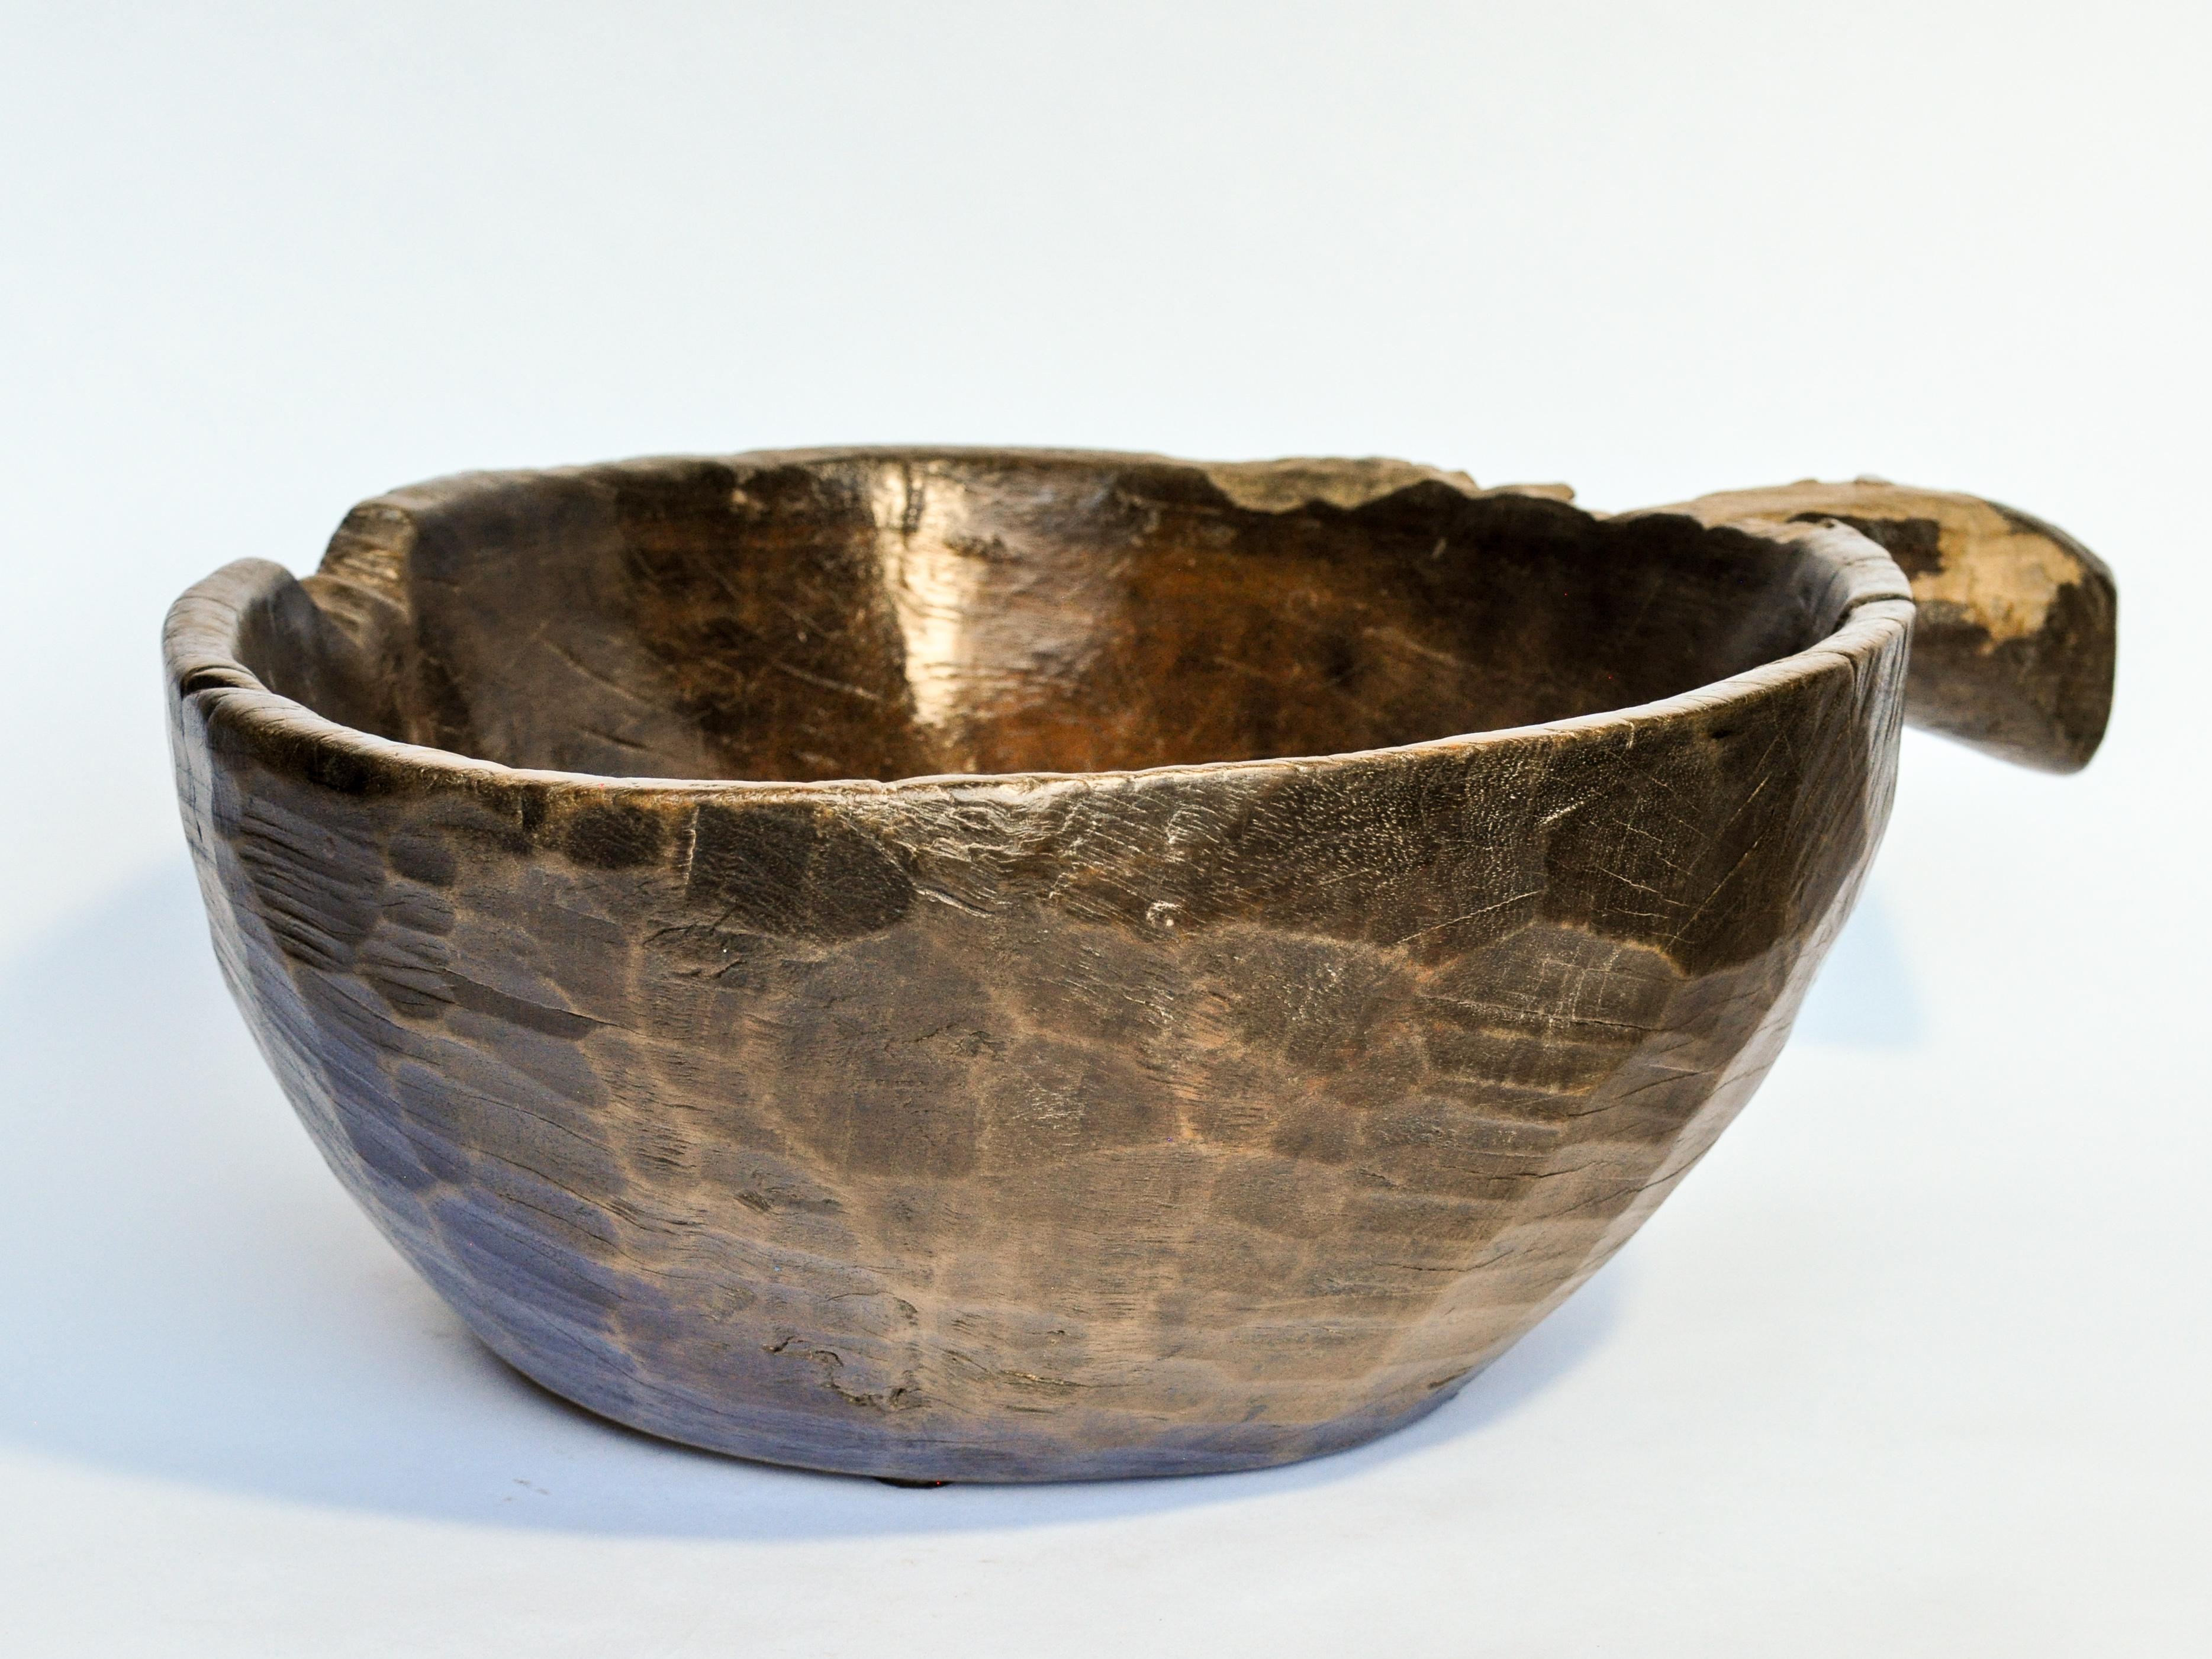 Hardwood Old Hand Hewn Wooden Bowl with Handle from Sulawesi, Indonesia, Mid-20th Century